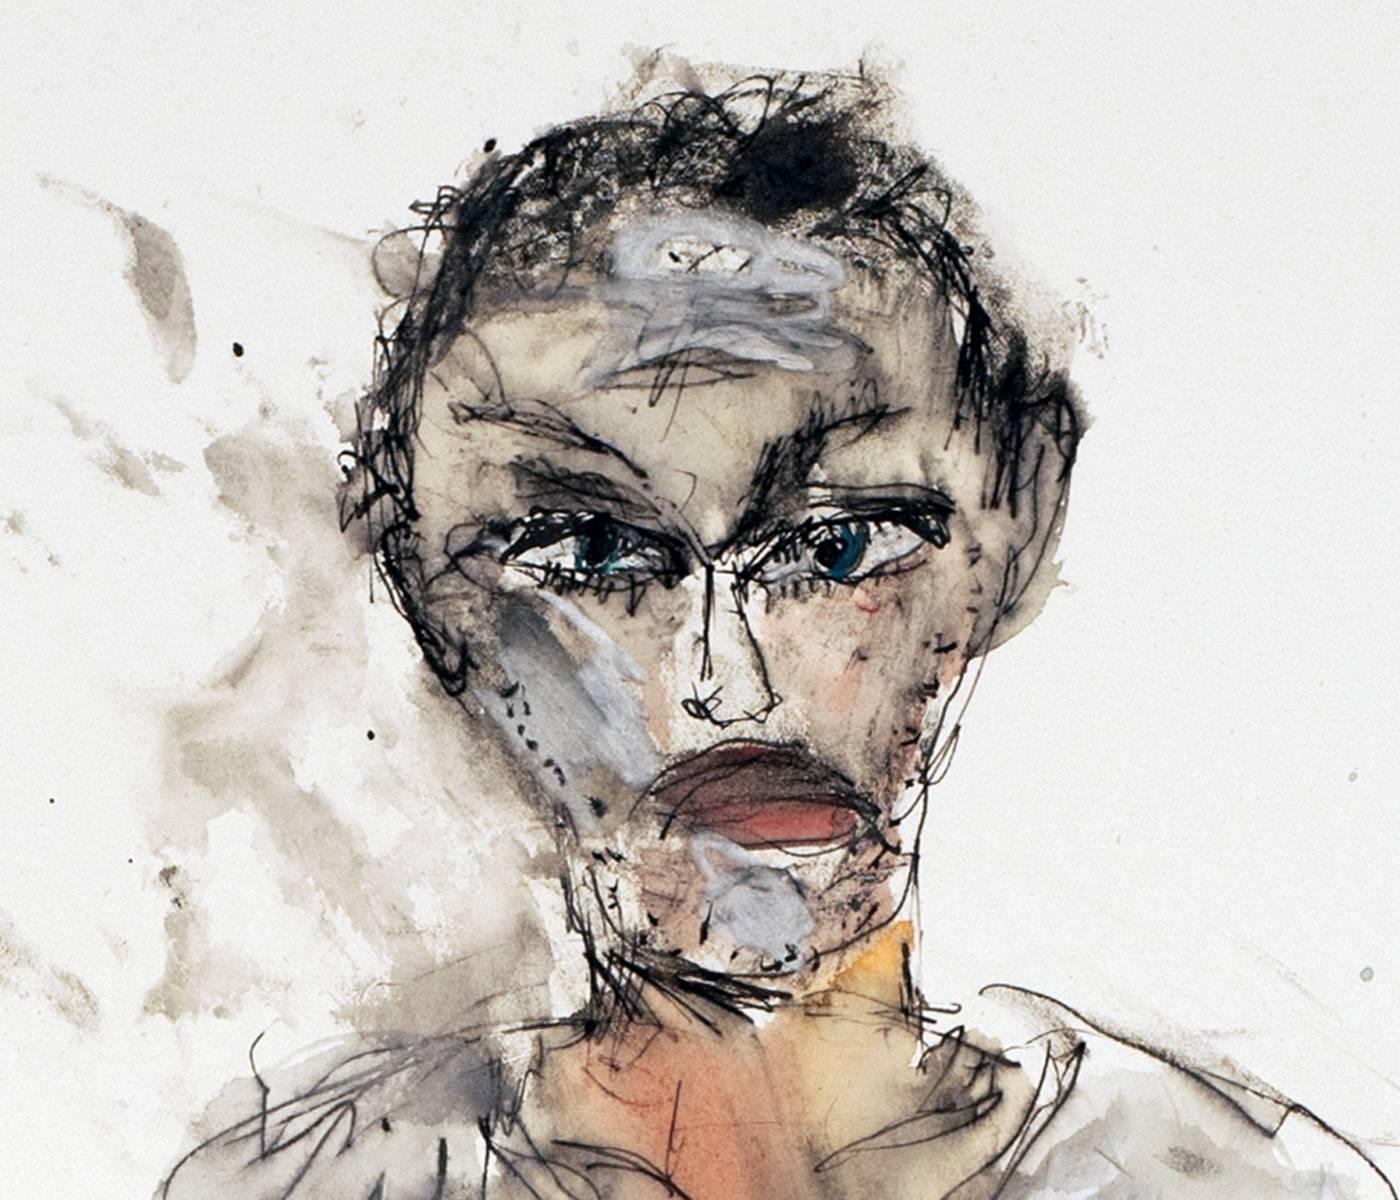 Self Portrait of the artist, standing man, watercolor painting on white paper. - Art by Michael Hafftka